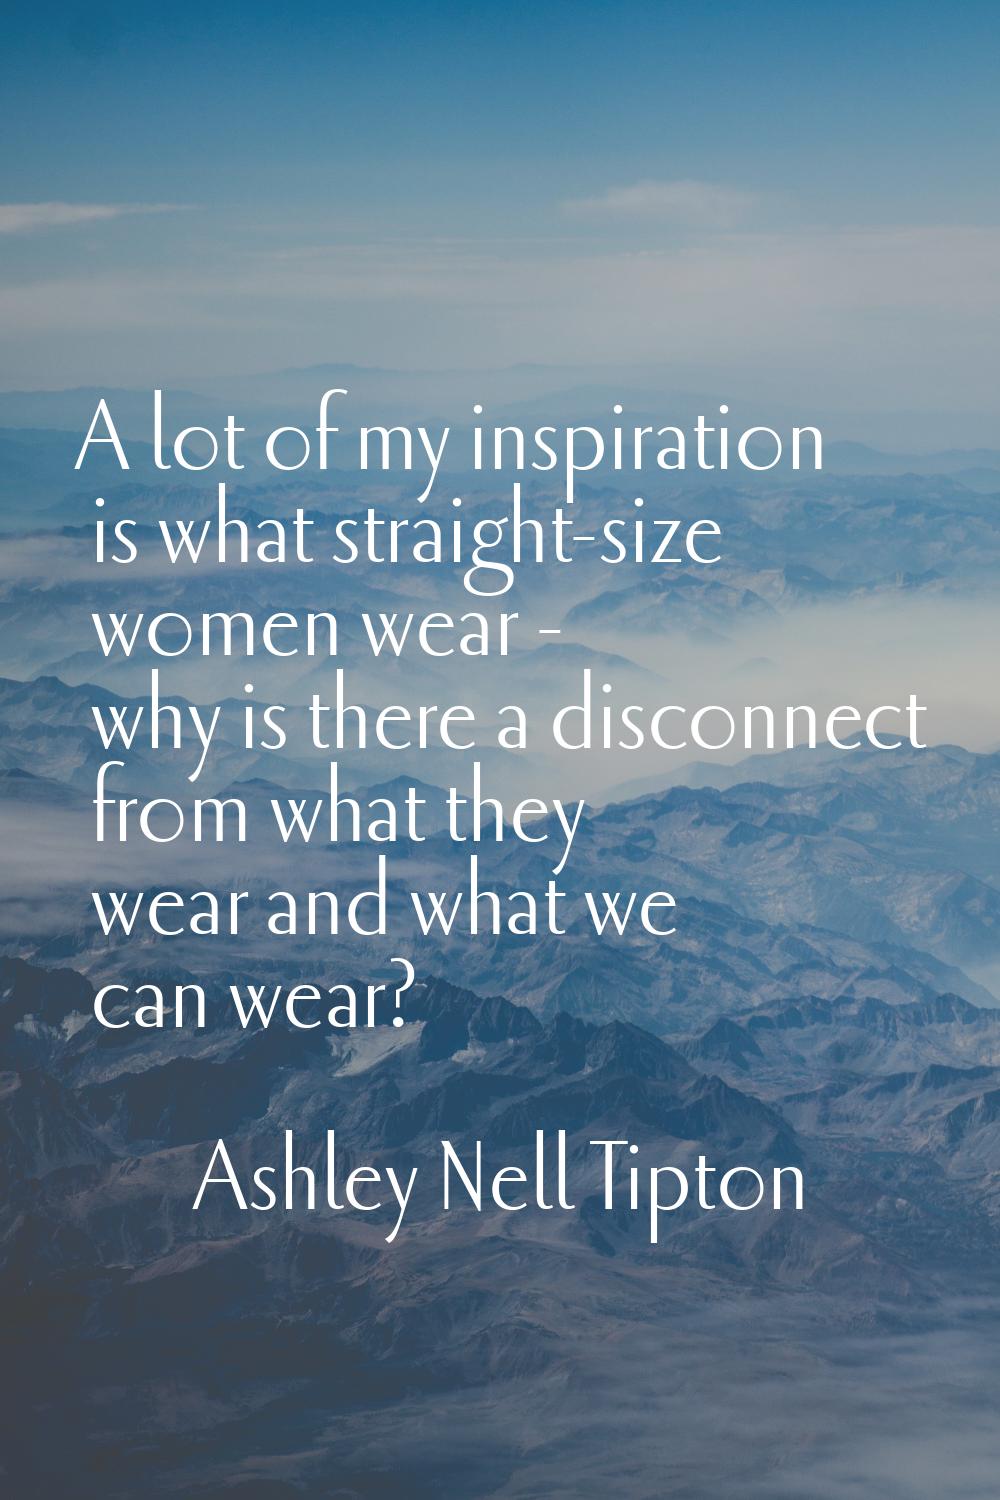 A lot of my inspiration is what straight-size women wear - why is there a disconnect from what they